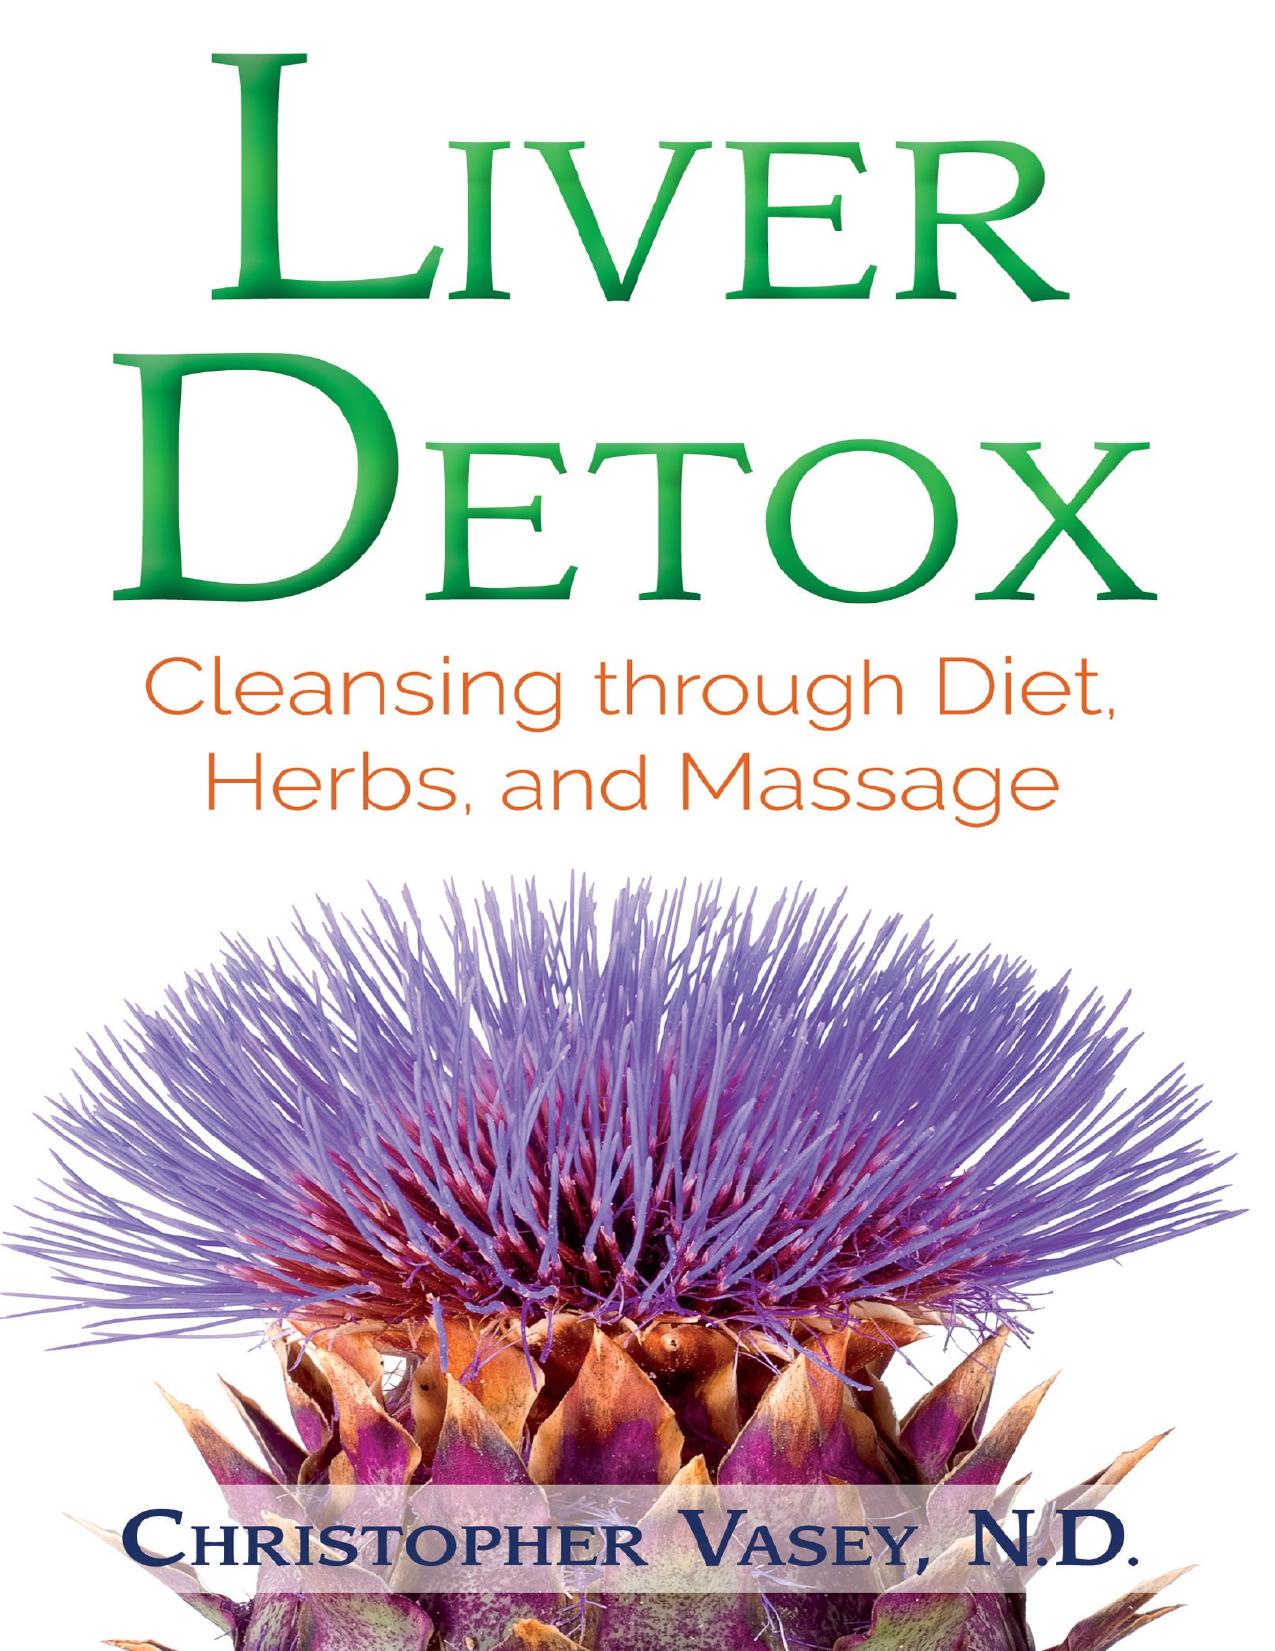 Liver Detox: Cleansing through Diet, Herbs, and Massage - PDFDrive.com